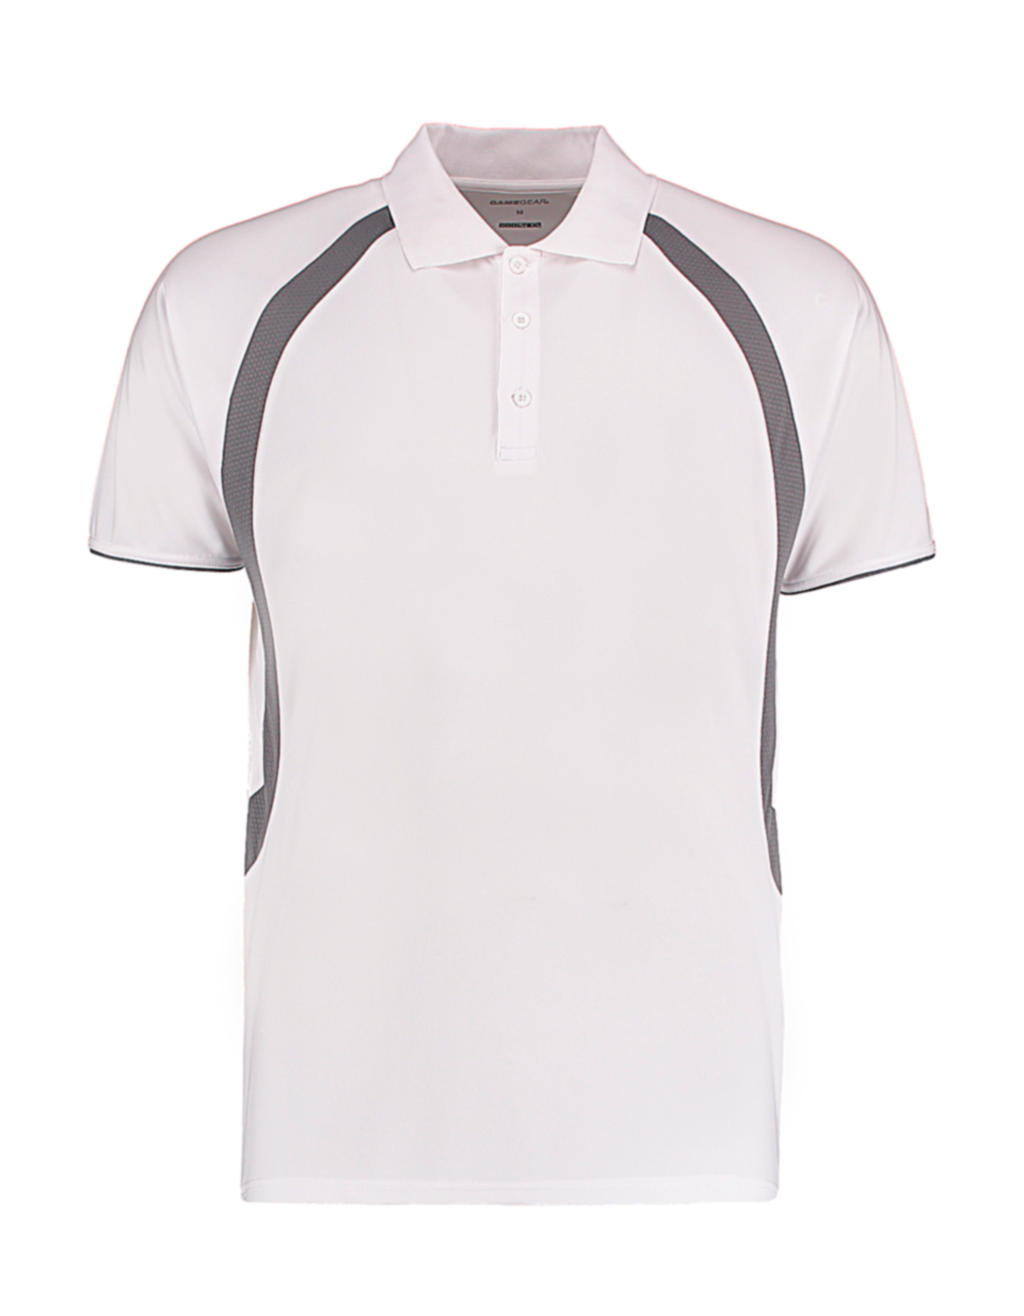  Classic Fit Cooltex? Riviera Polo Shirt in Farbe White/Grey